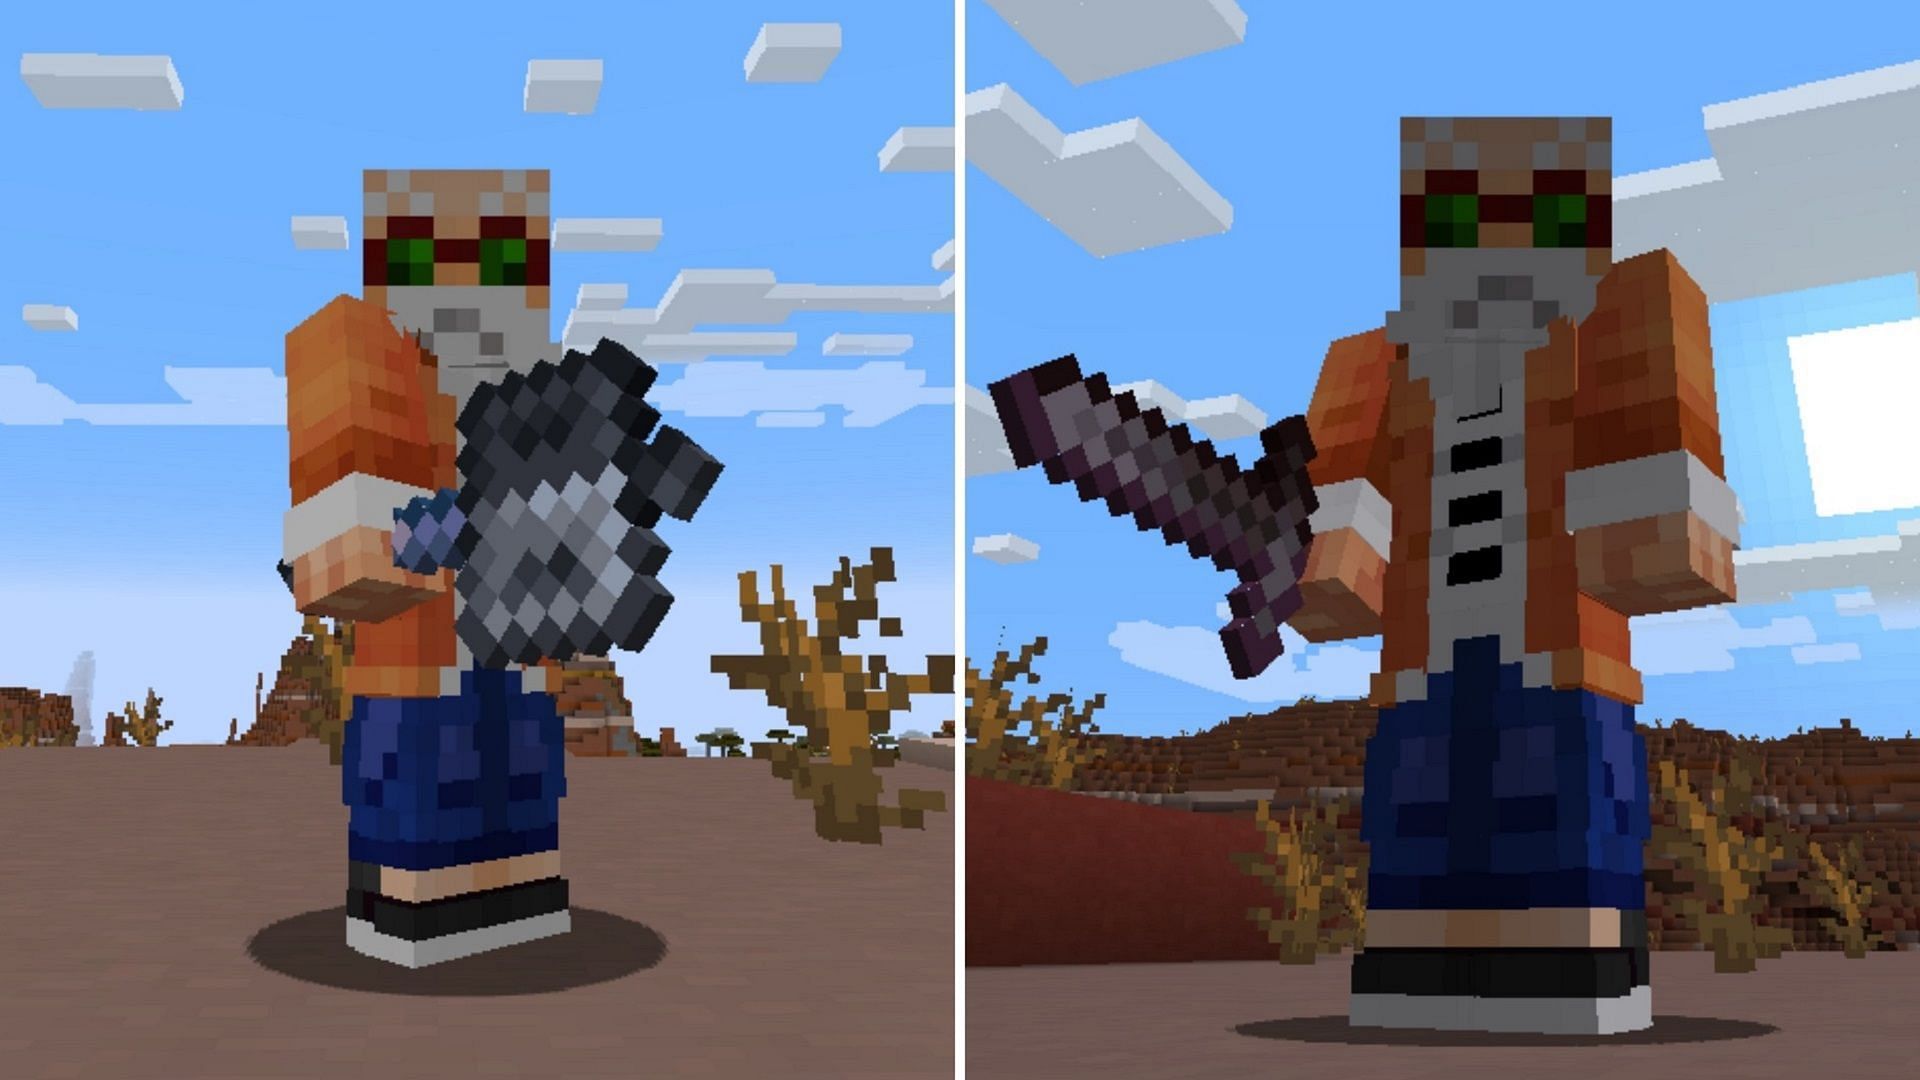 Mace vs sword in Minecraft: Which weapon is better?